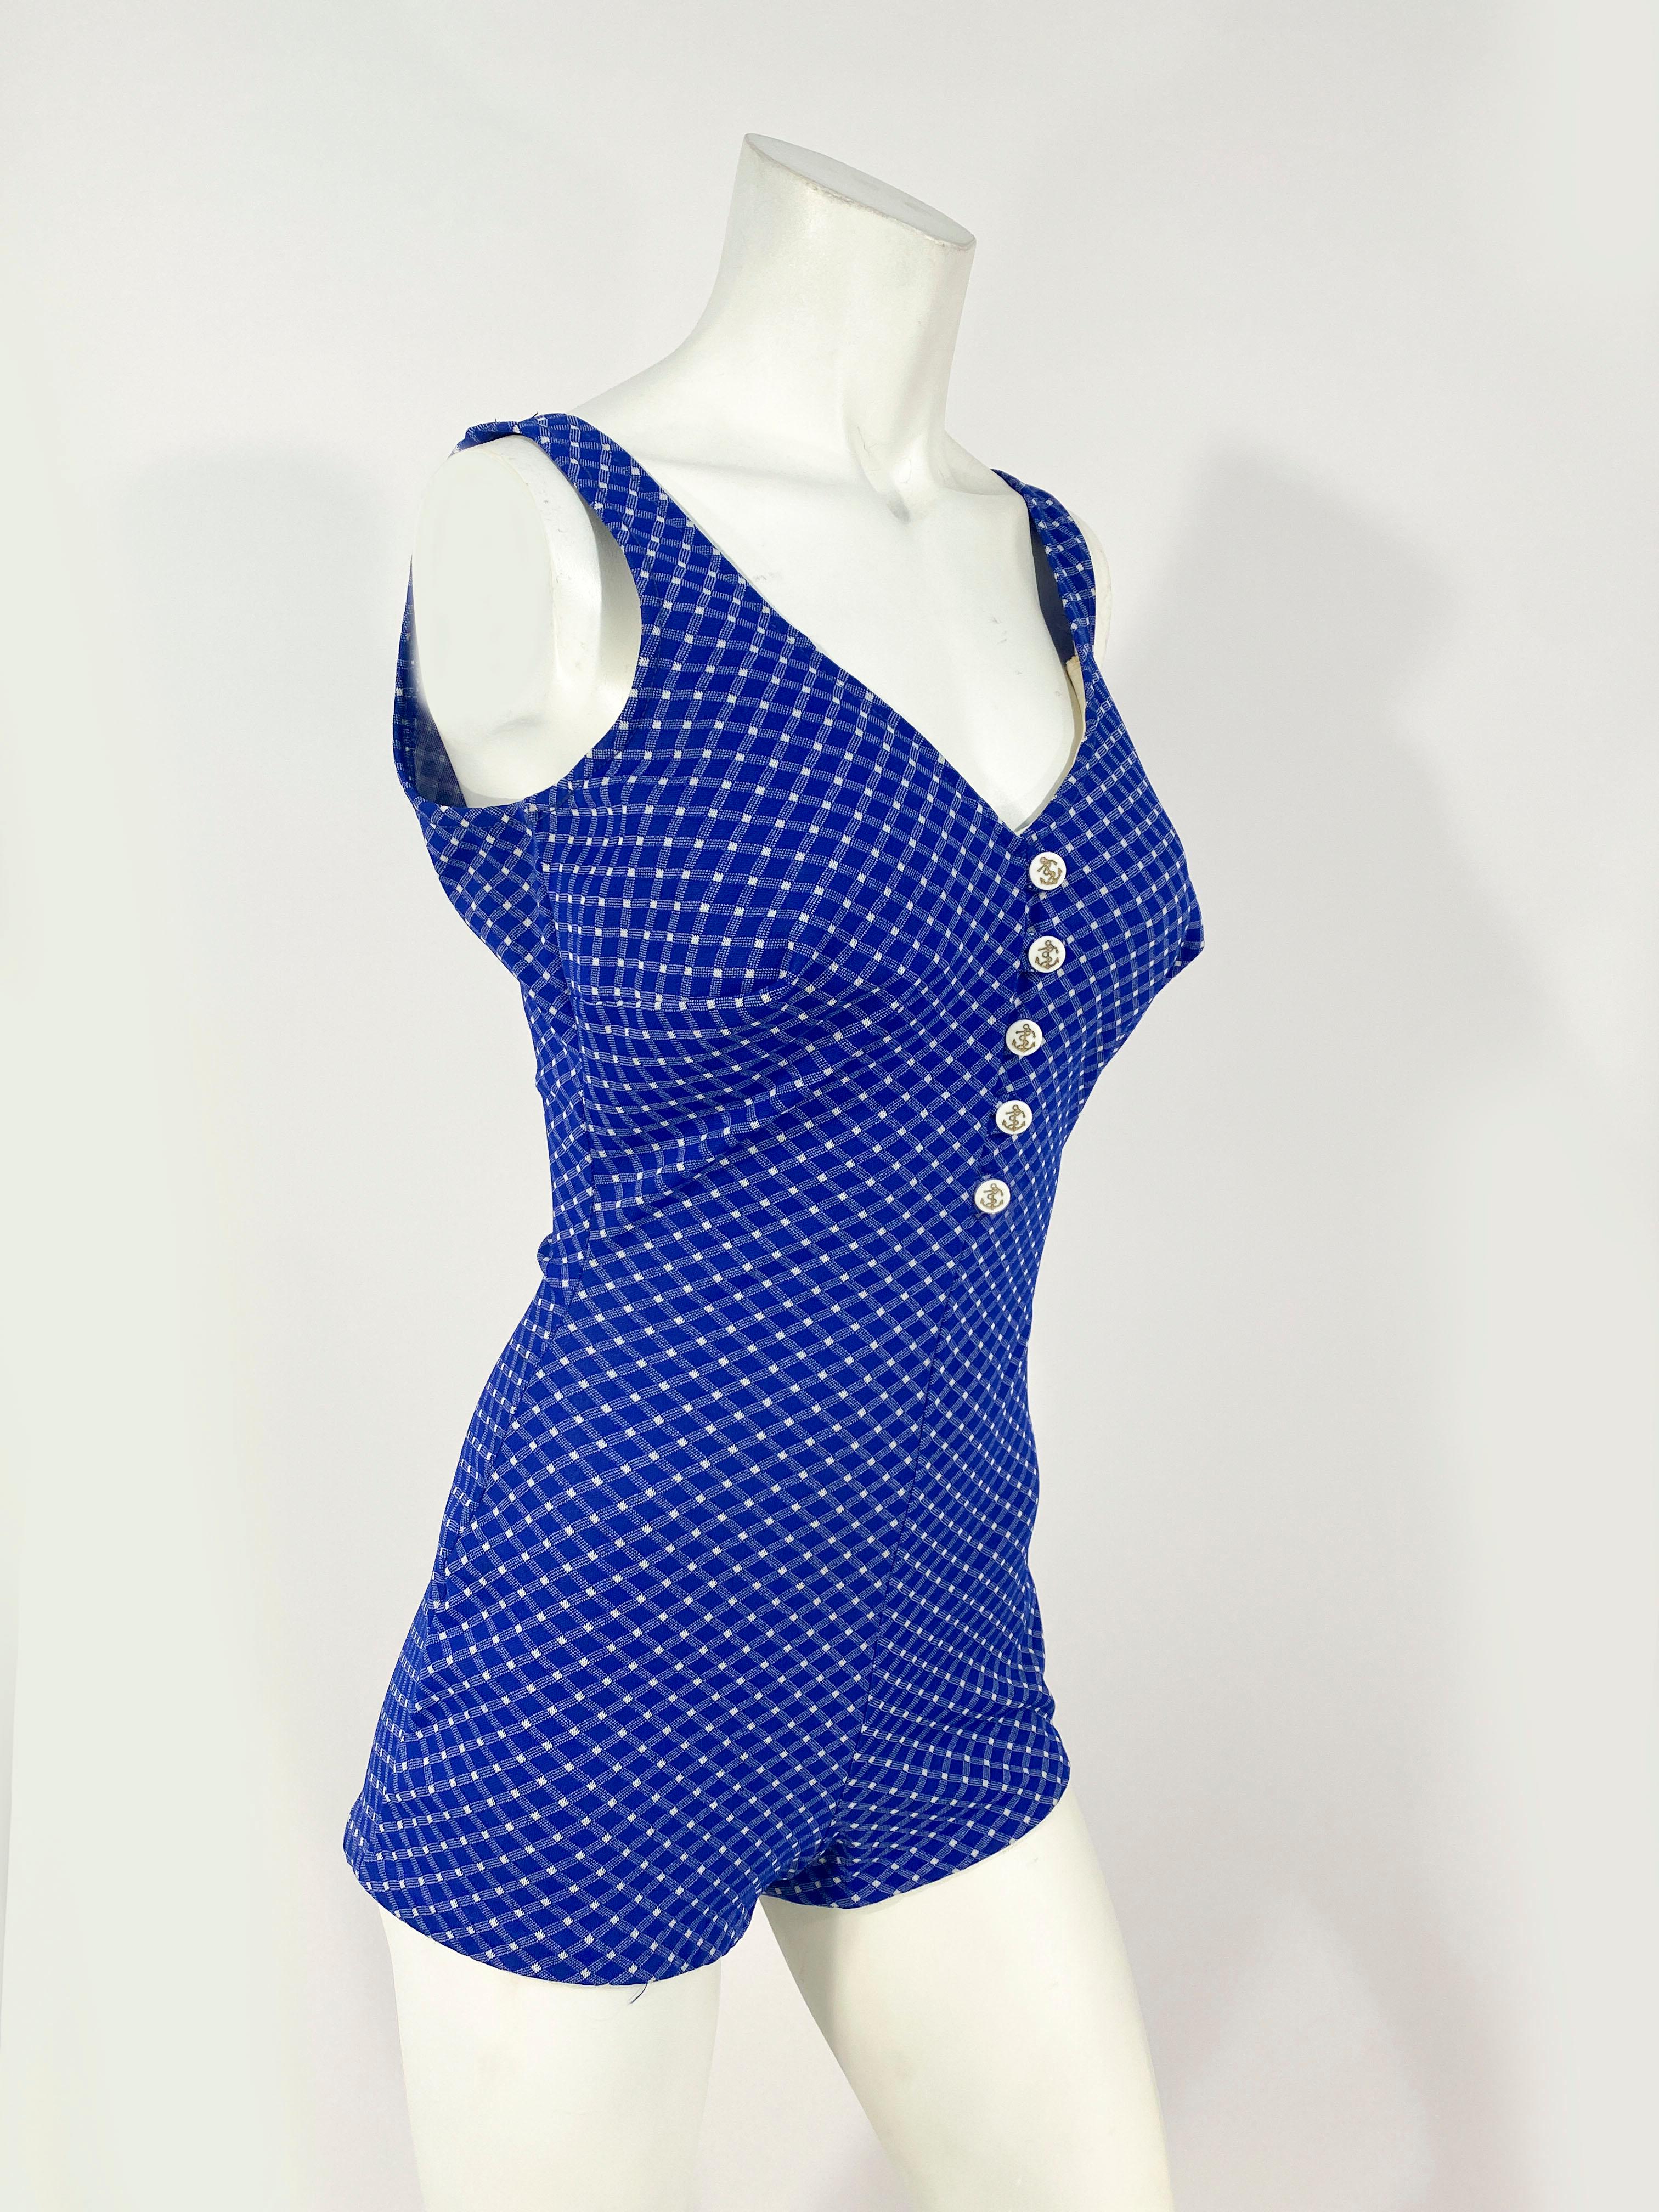 blue and white gingham bathing suit